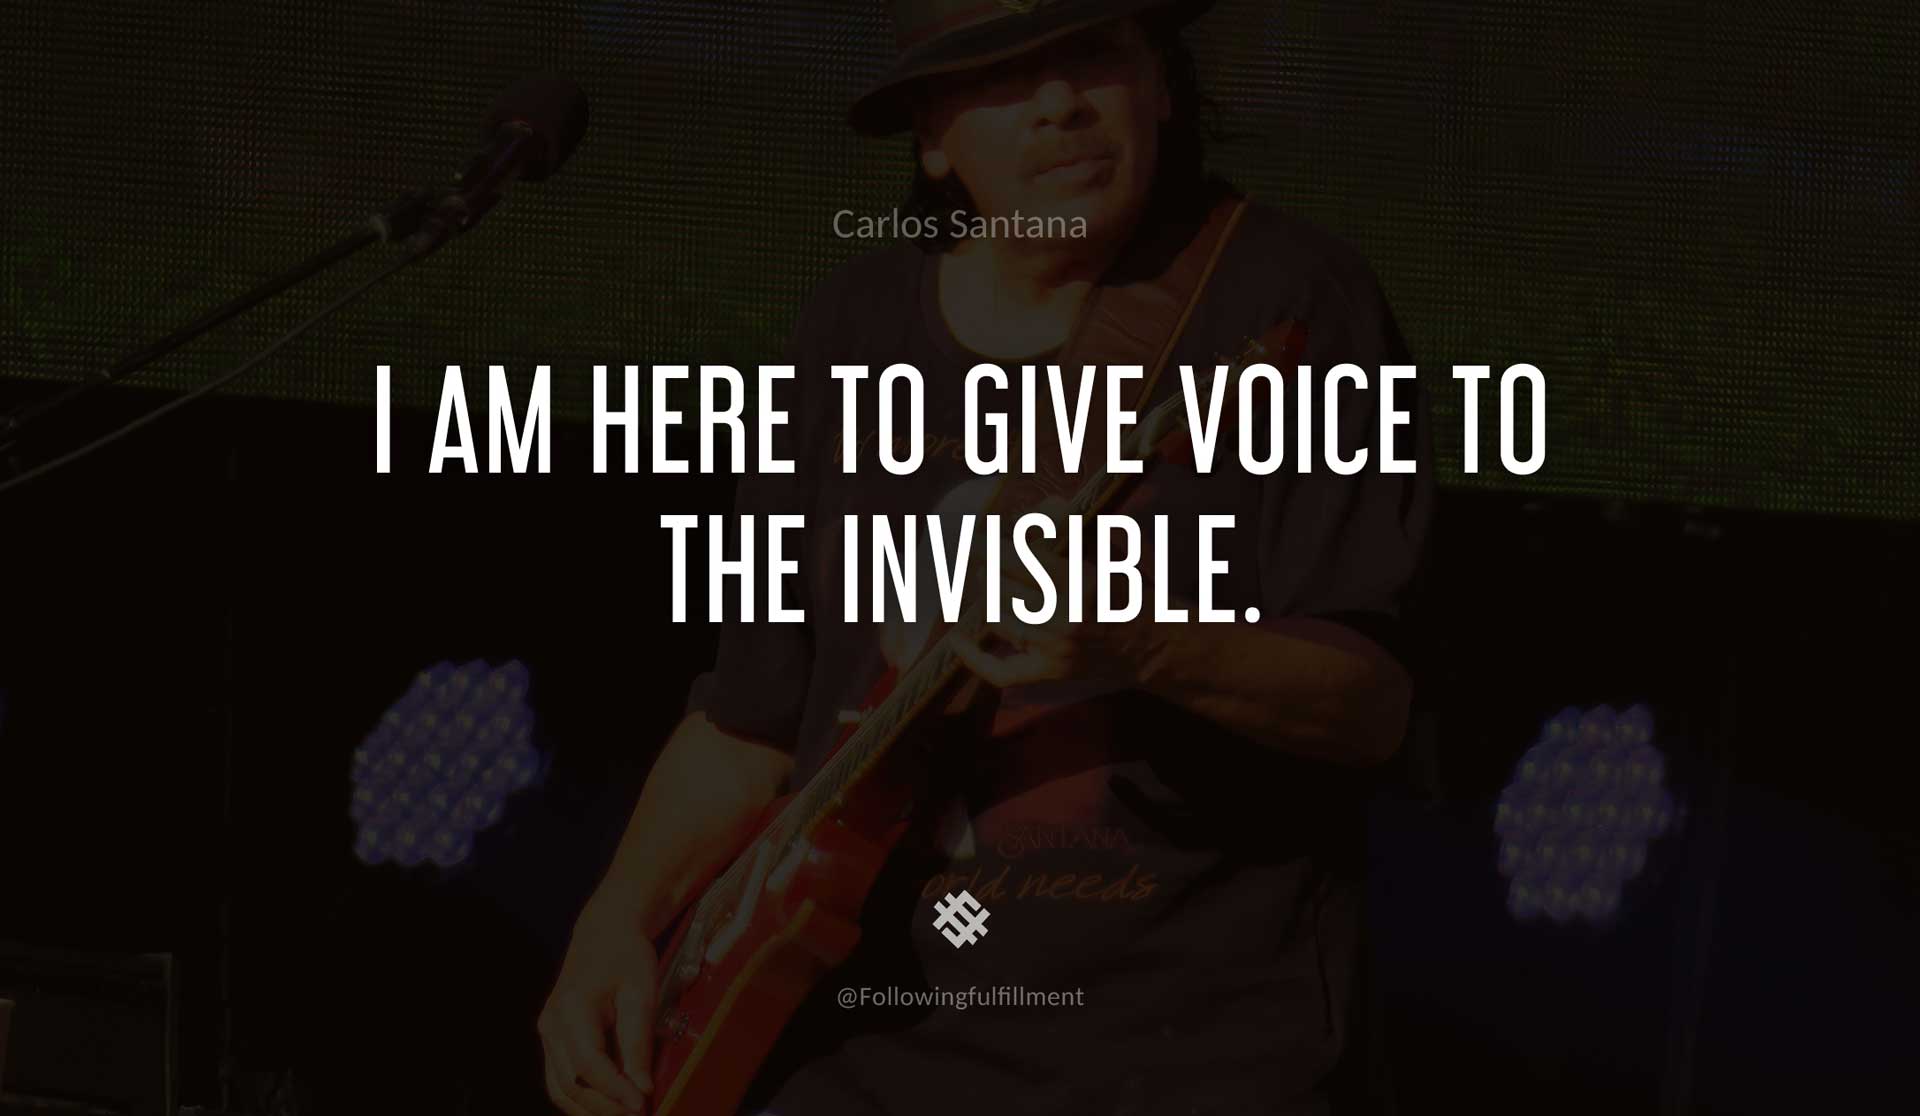 I-am-here-to-give-voice-to-the-invisible.-CARLOS-SANTANA-Quote.jpg